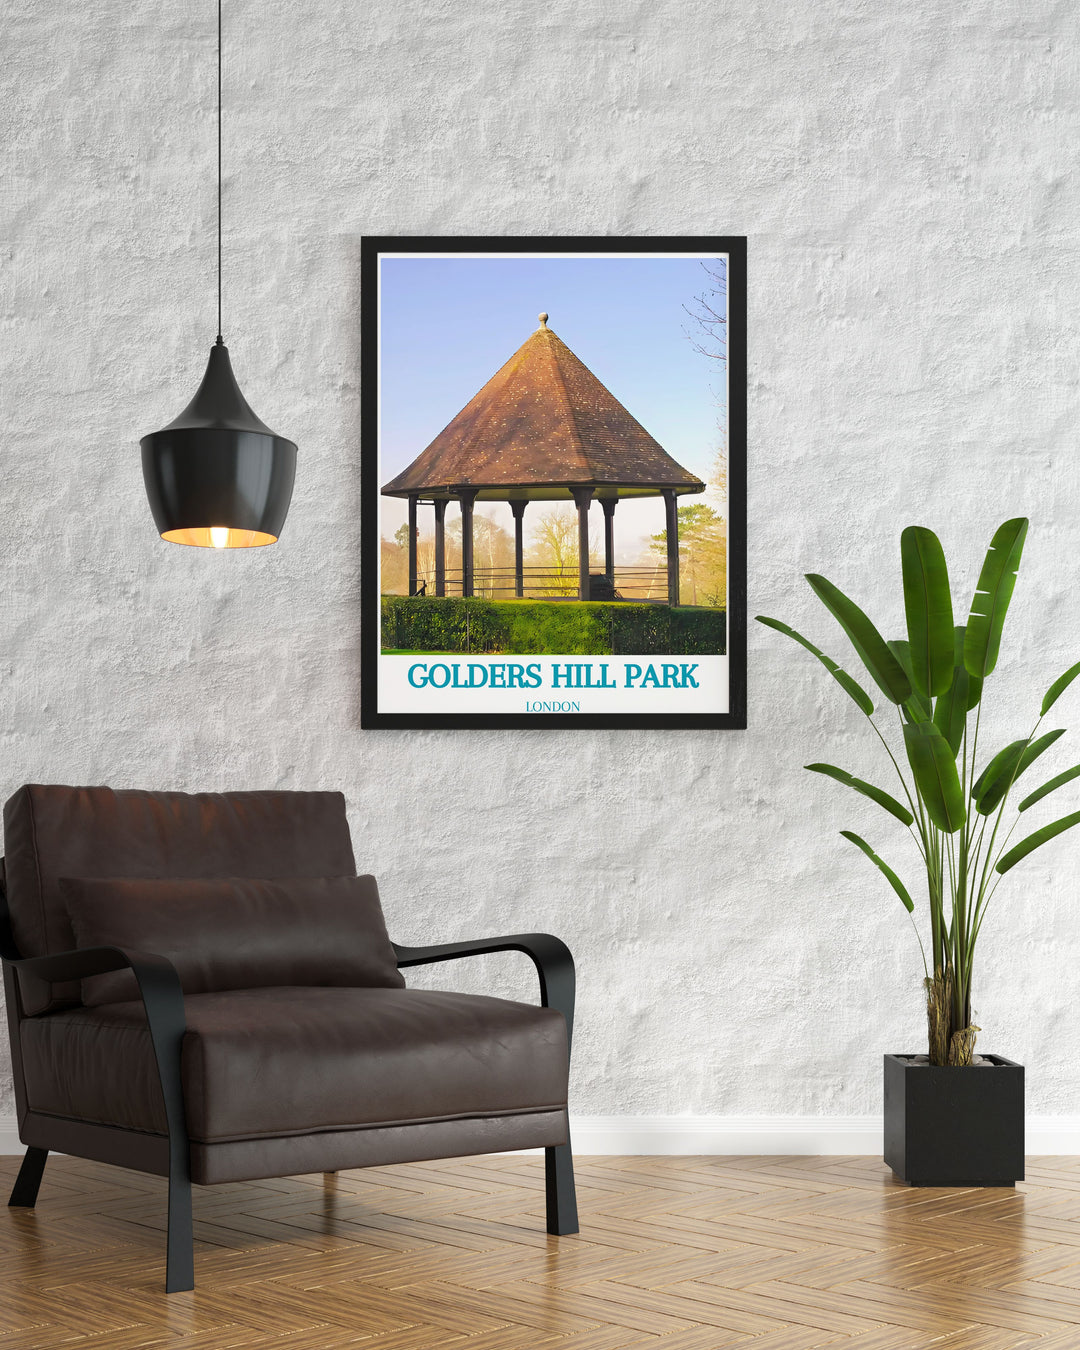 A detailed digital print capturing the timeless elegance of the bandstand in Golders Hill Park, set amidst beautifully landscaped gardens, ideal for adding a touch of Londons cultural heritage to any room.